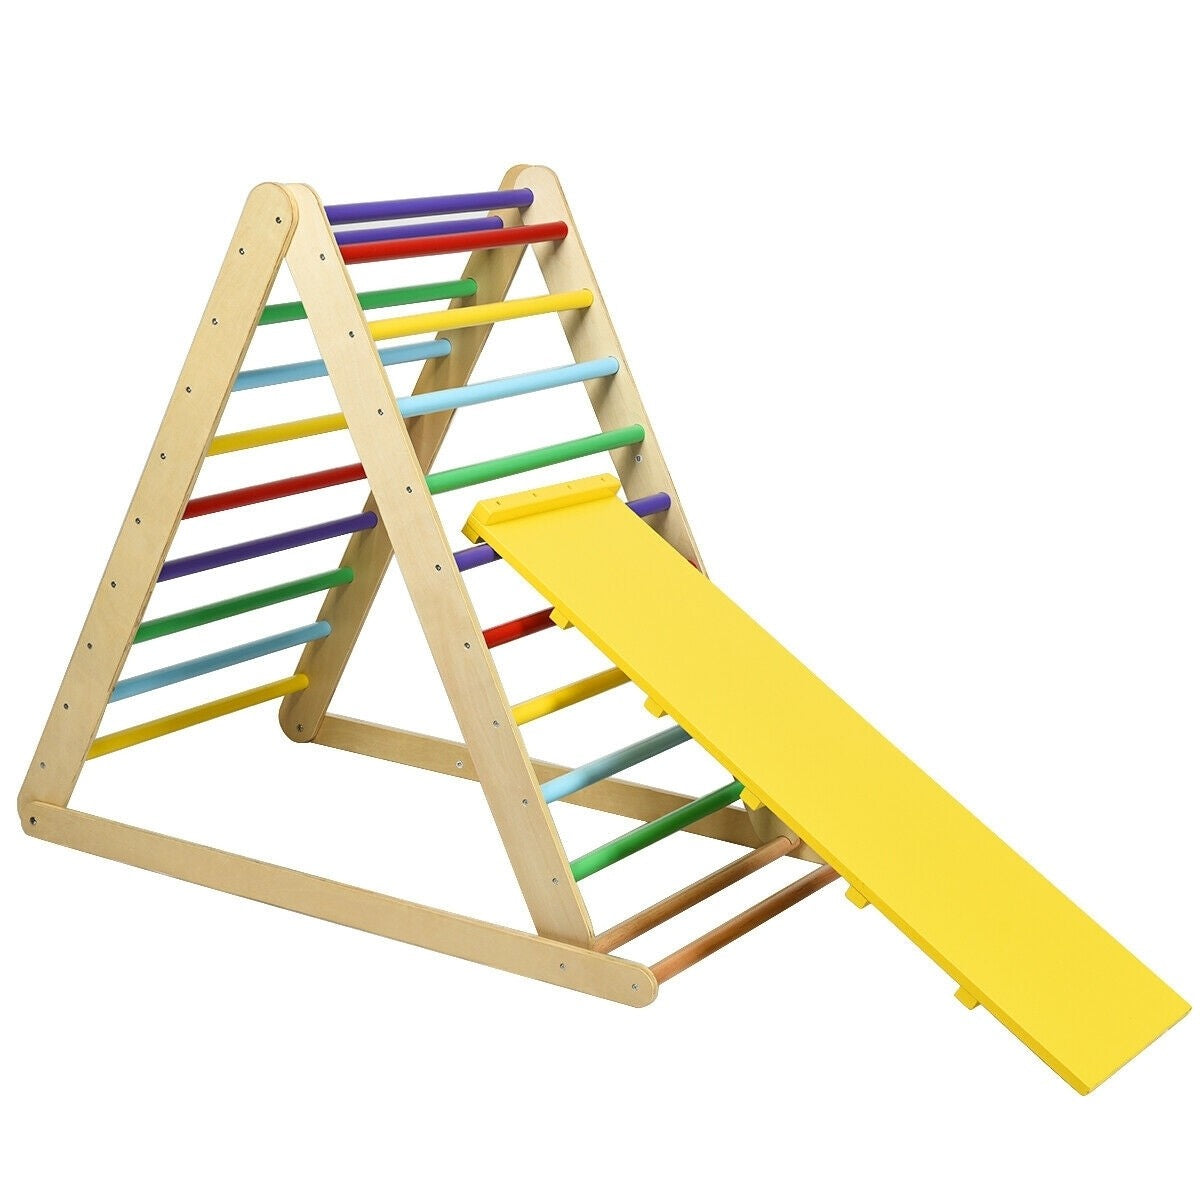 Foldable Wooden Climbing Triangle with Ladder - Mulitcolour | Rebelstork